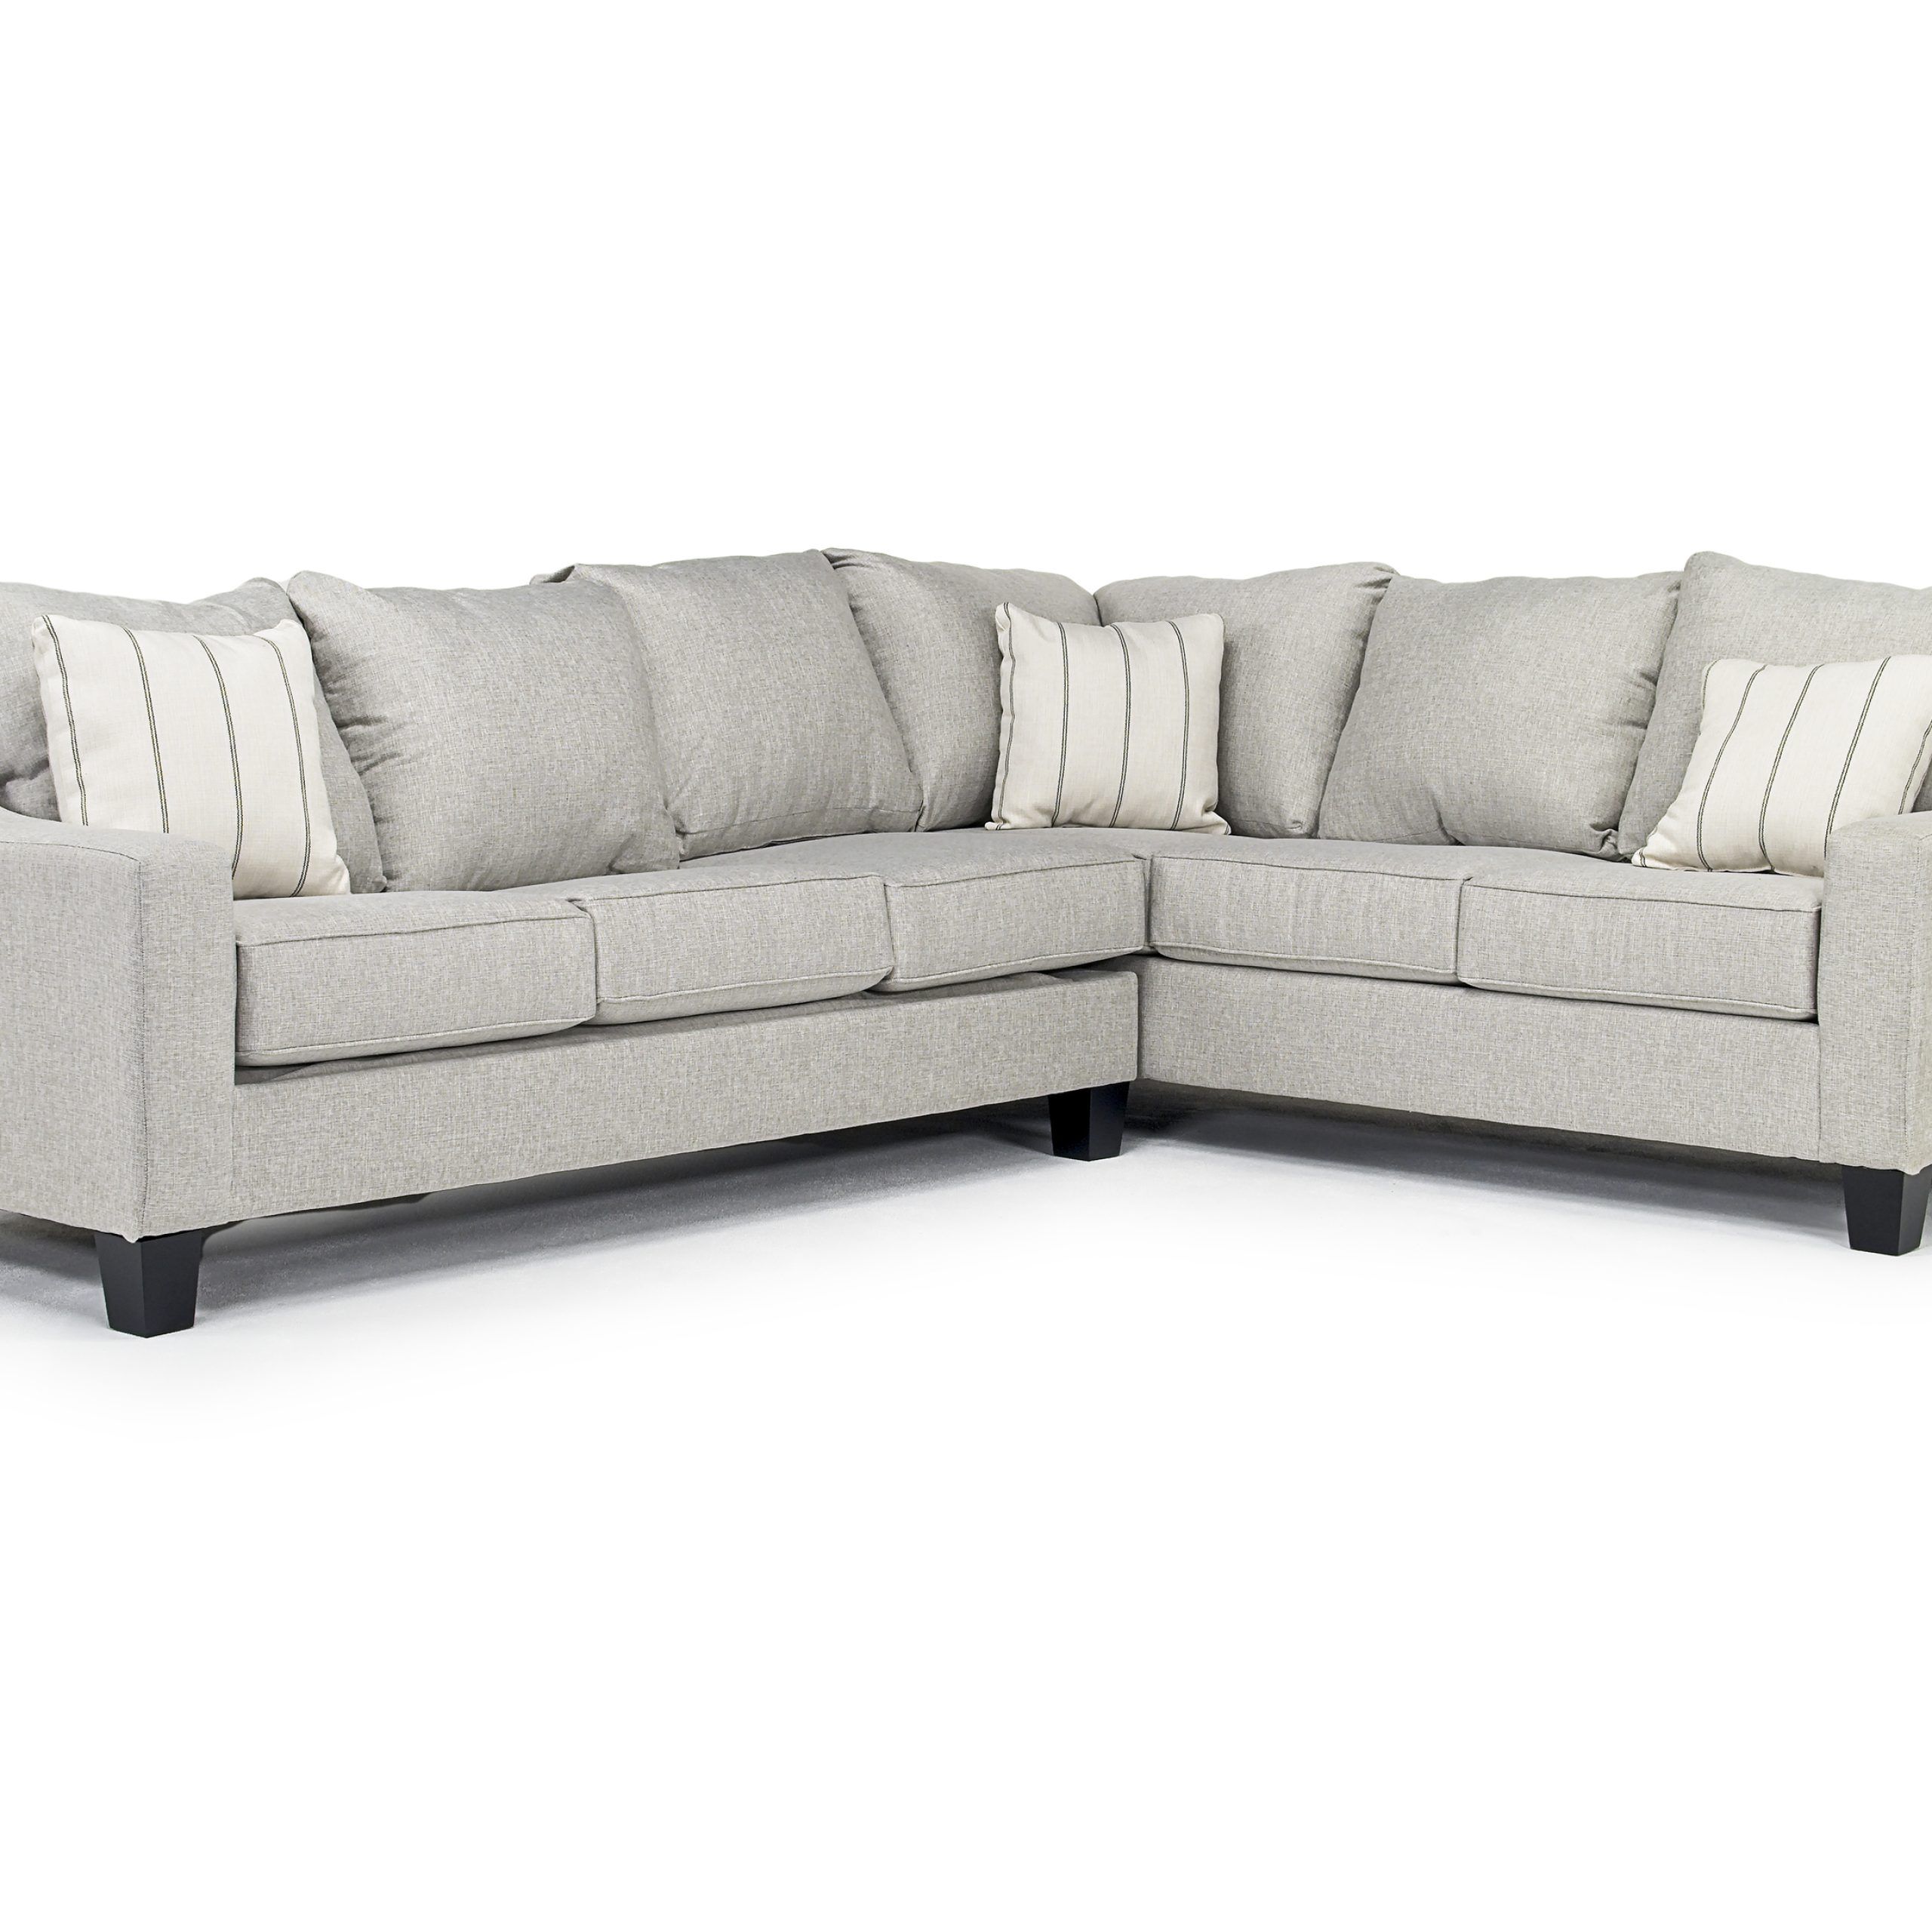 Lucy Tux Queen Sleeper Sectional In Splash Linen, Left Facing For Left Or Right Facing Sleeper Sectionals (View 11 of 15)